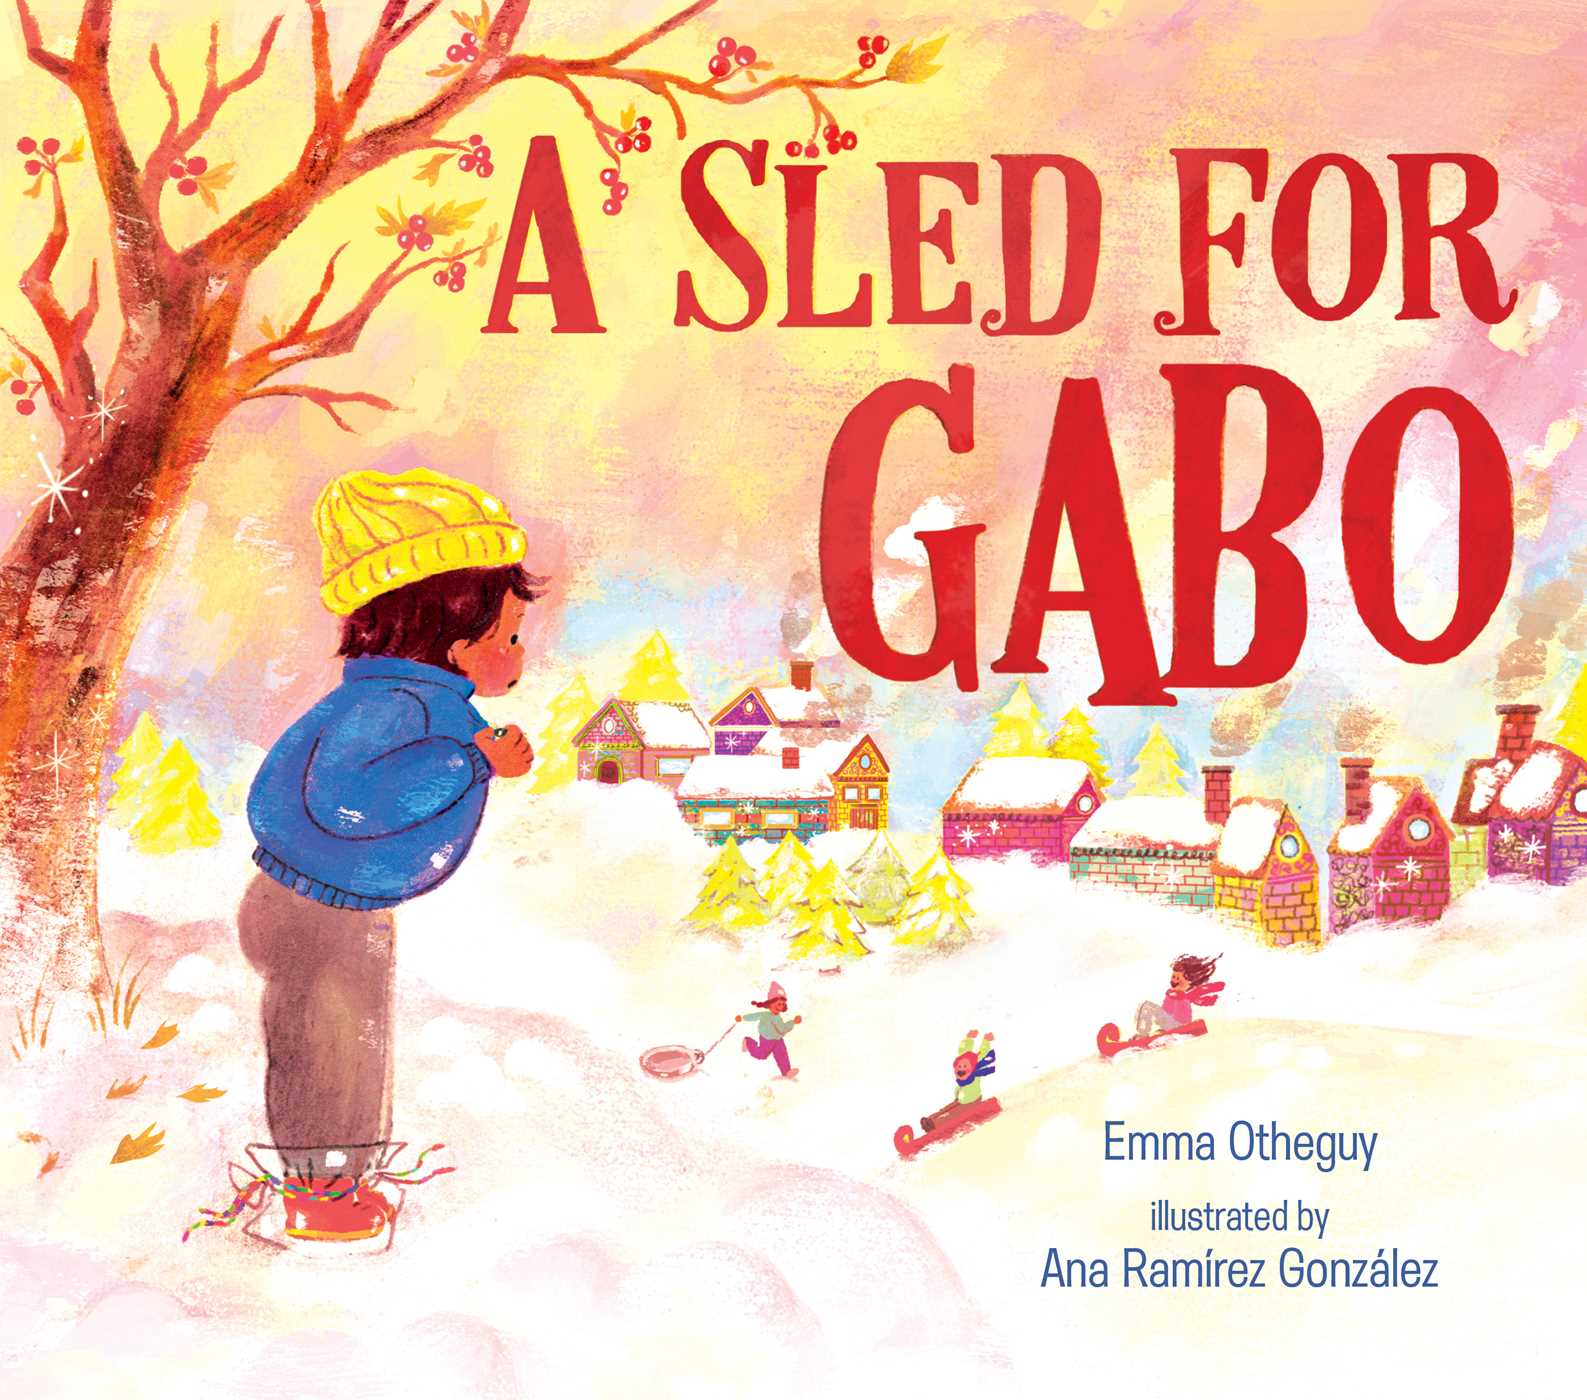 the cover a book showing a child looking a snow and the book is titled a s led for gabo